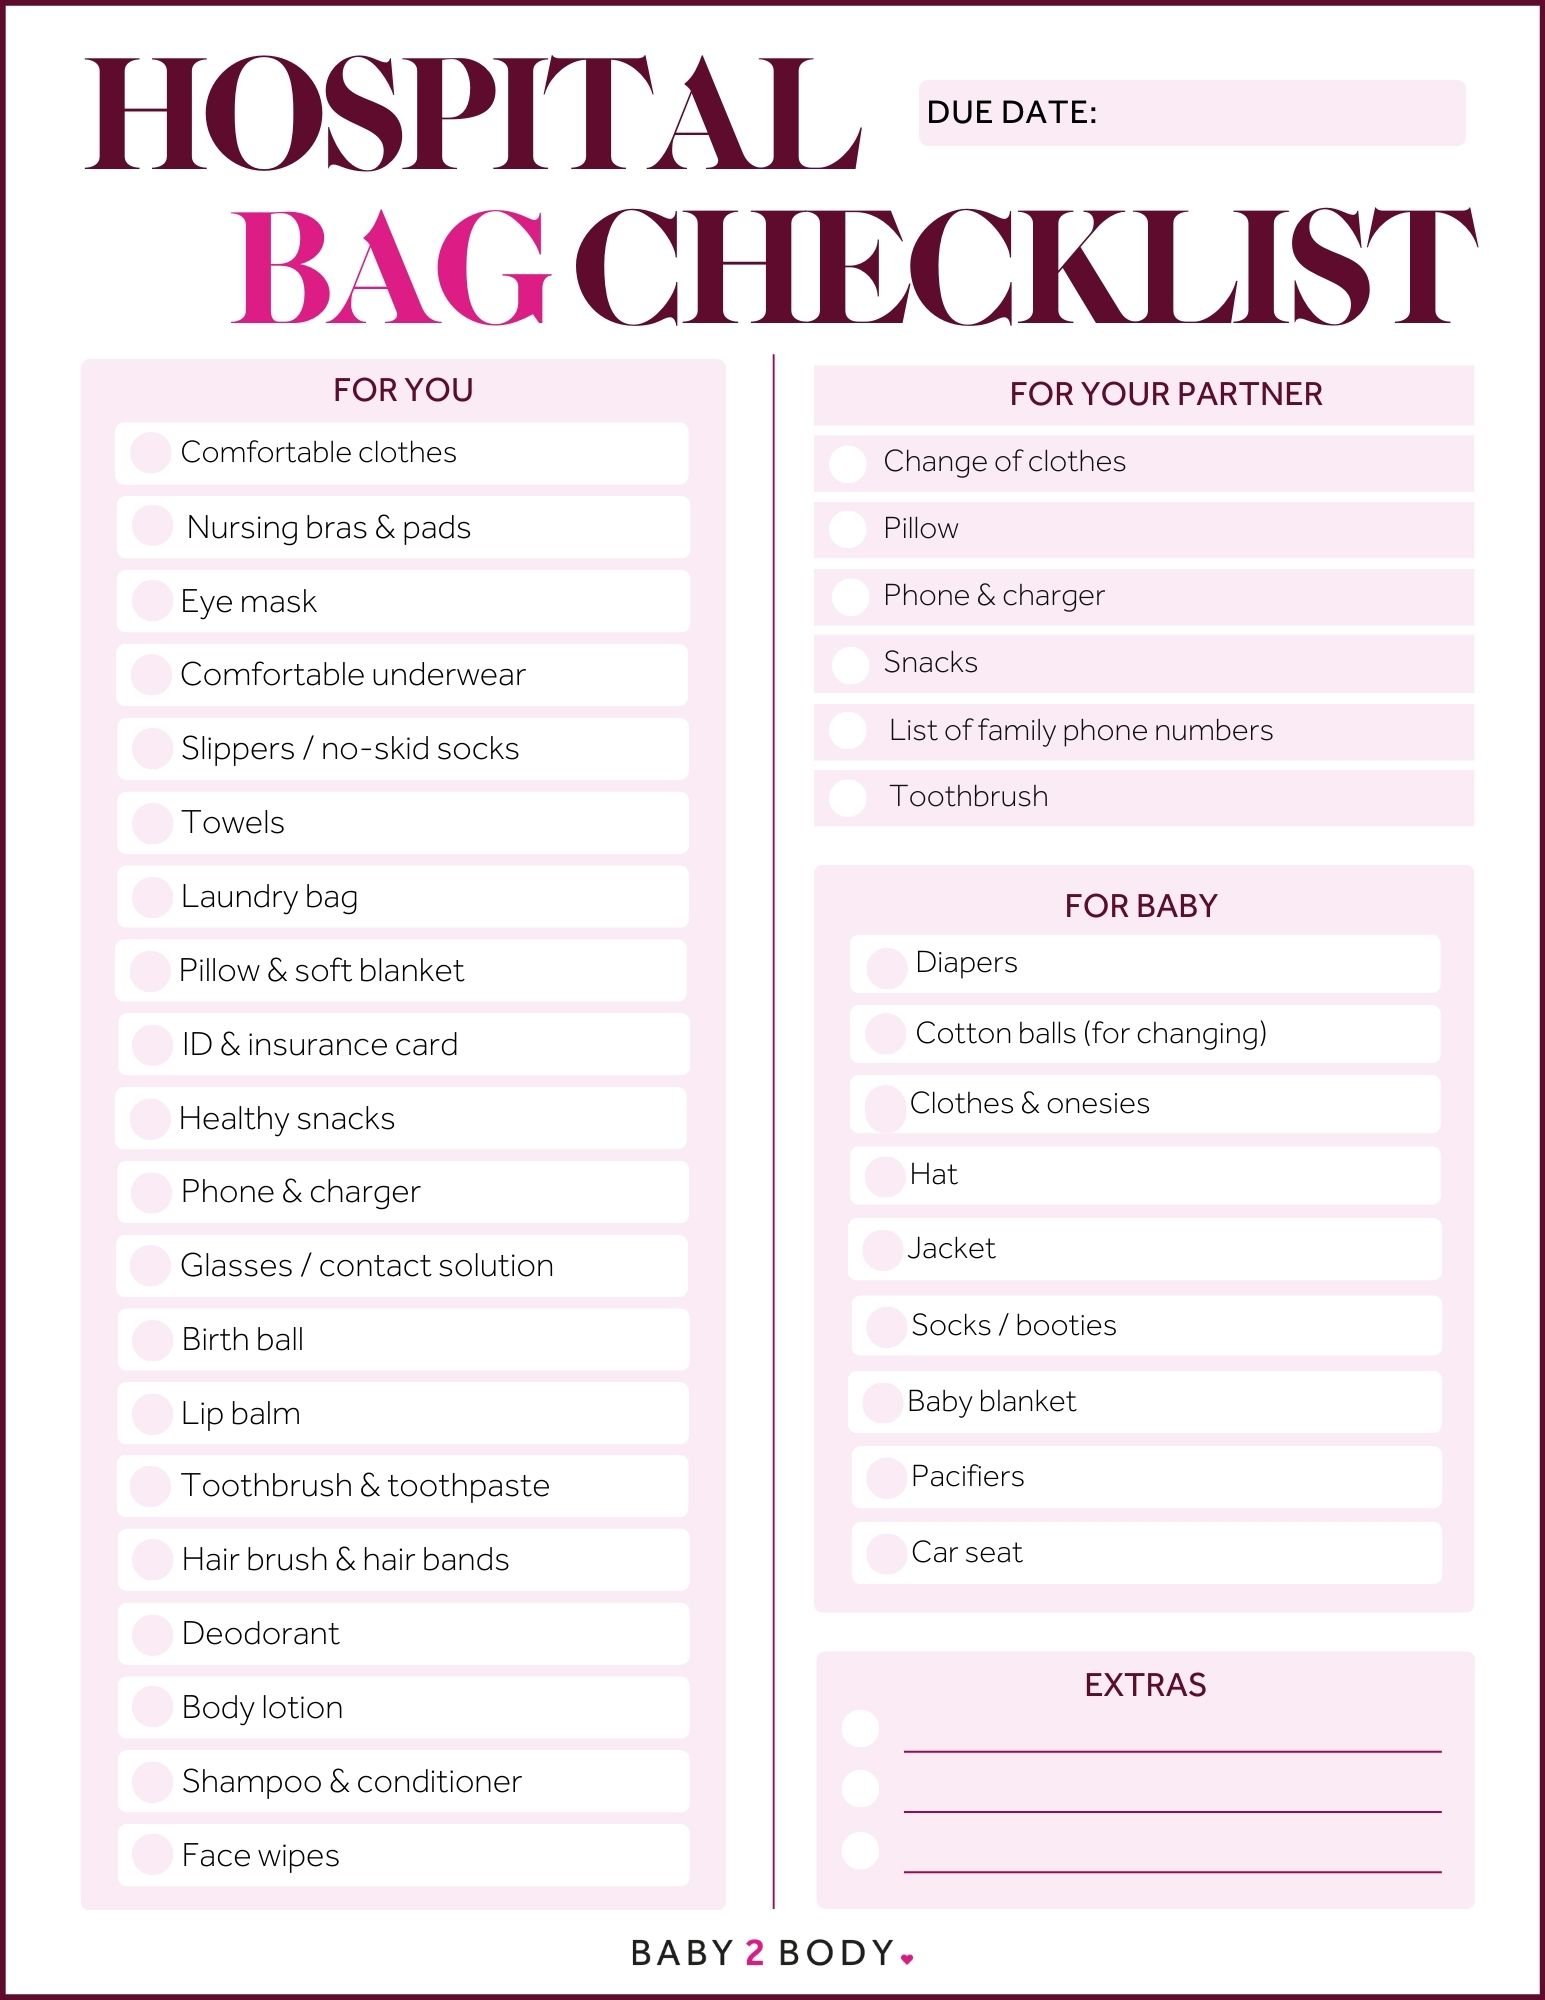 Hospital Bag Checklist: What to Pack in Your Hospital Bag